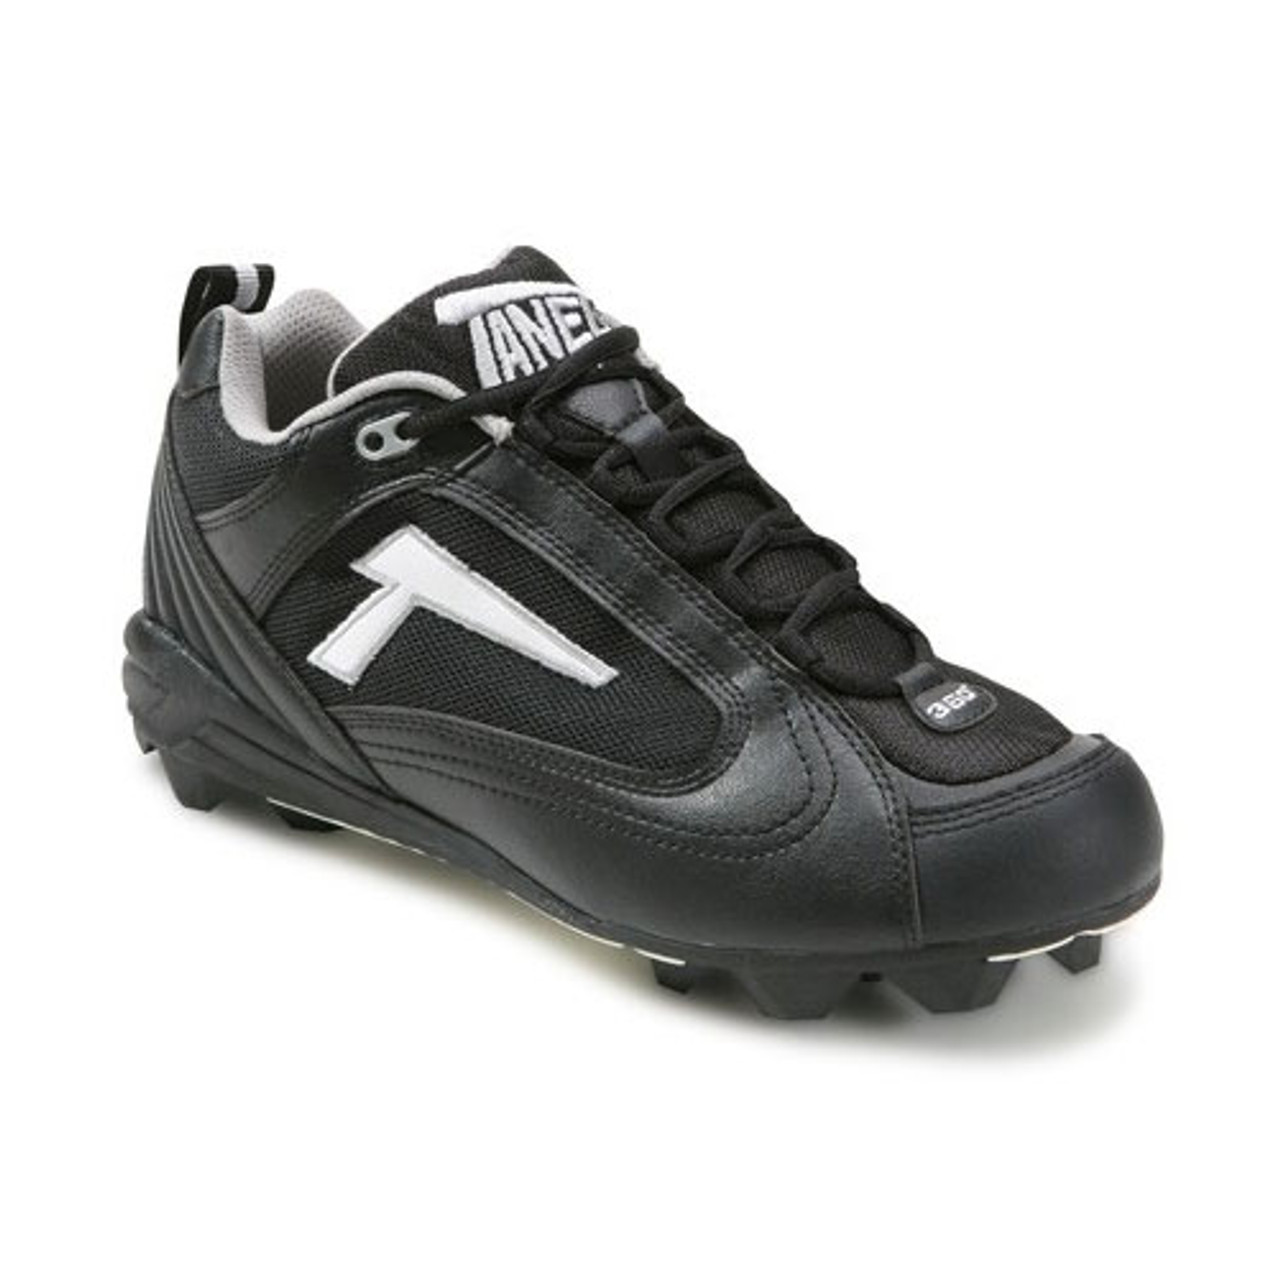 Tanel 360 RPM Cleat Low Baseball 